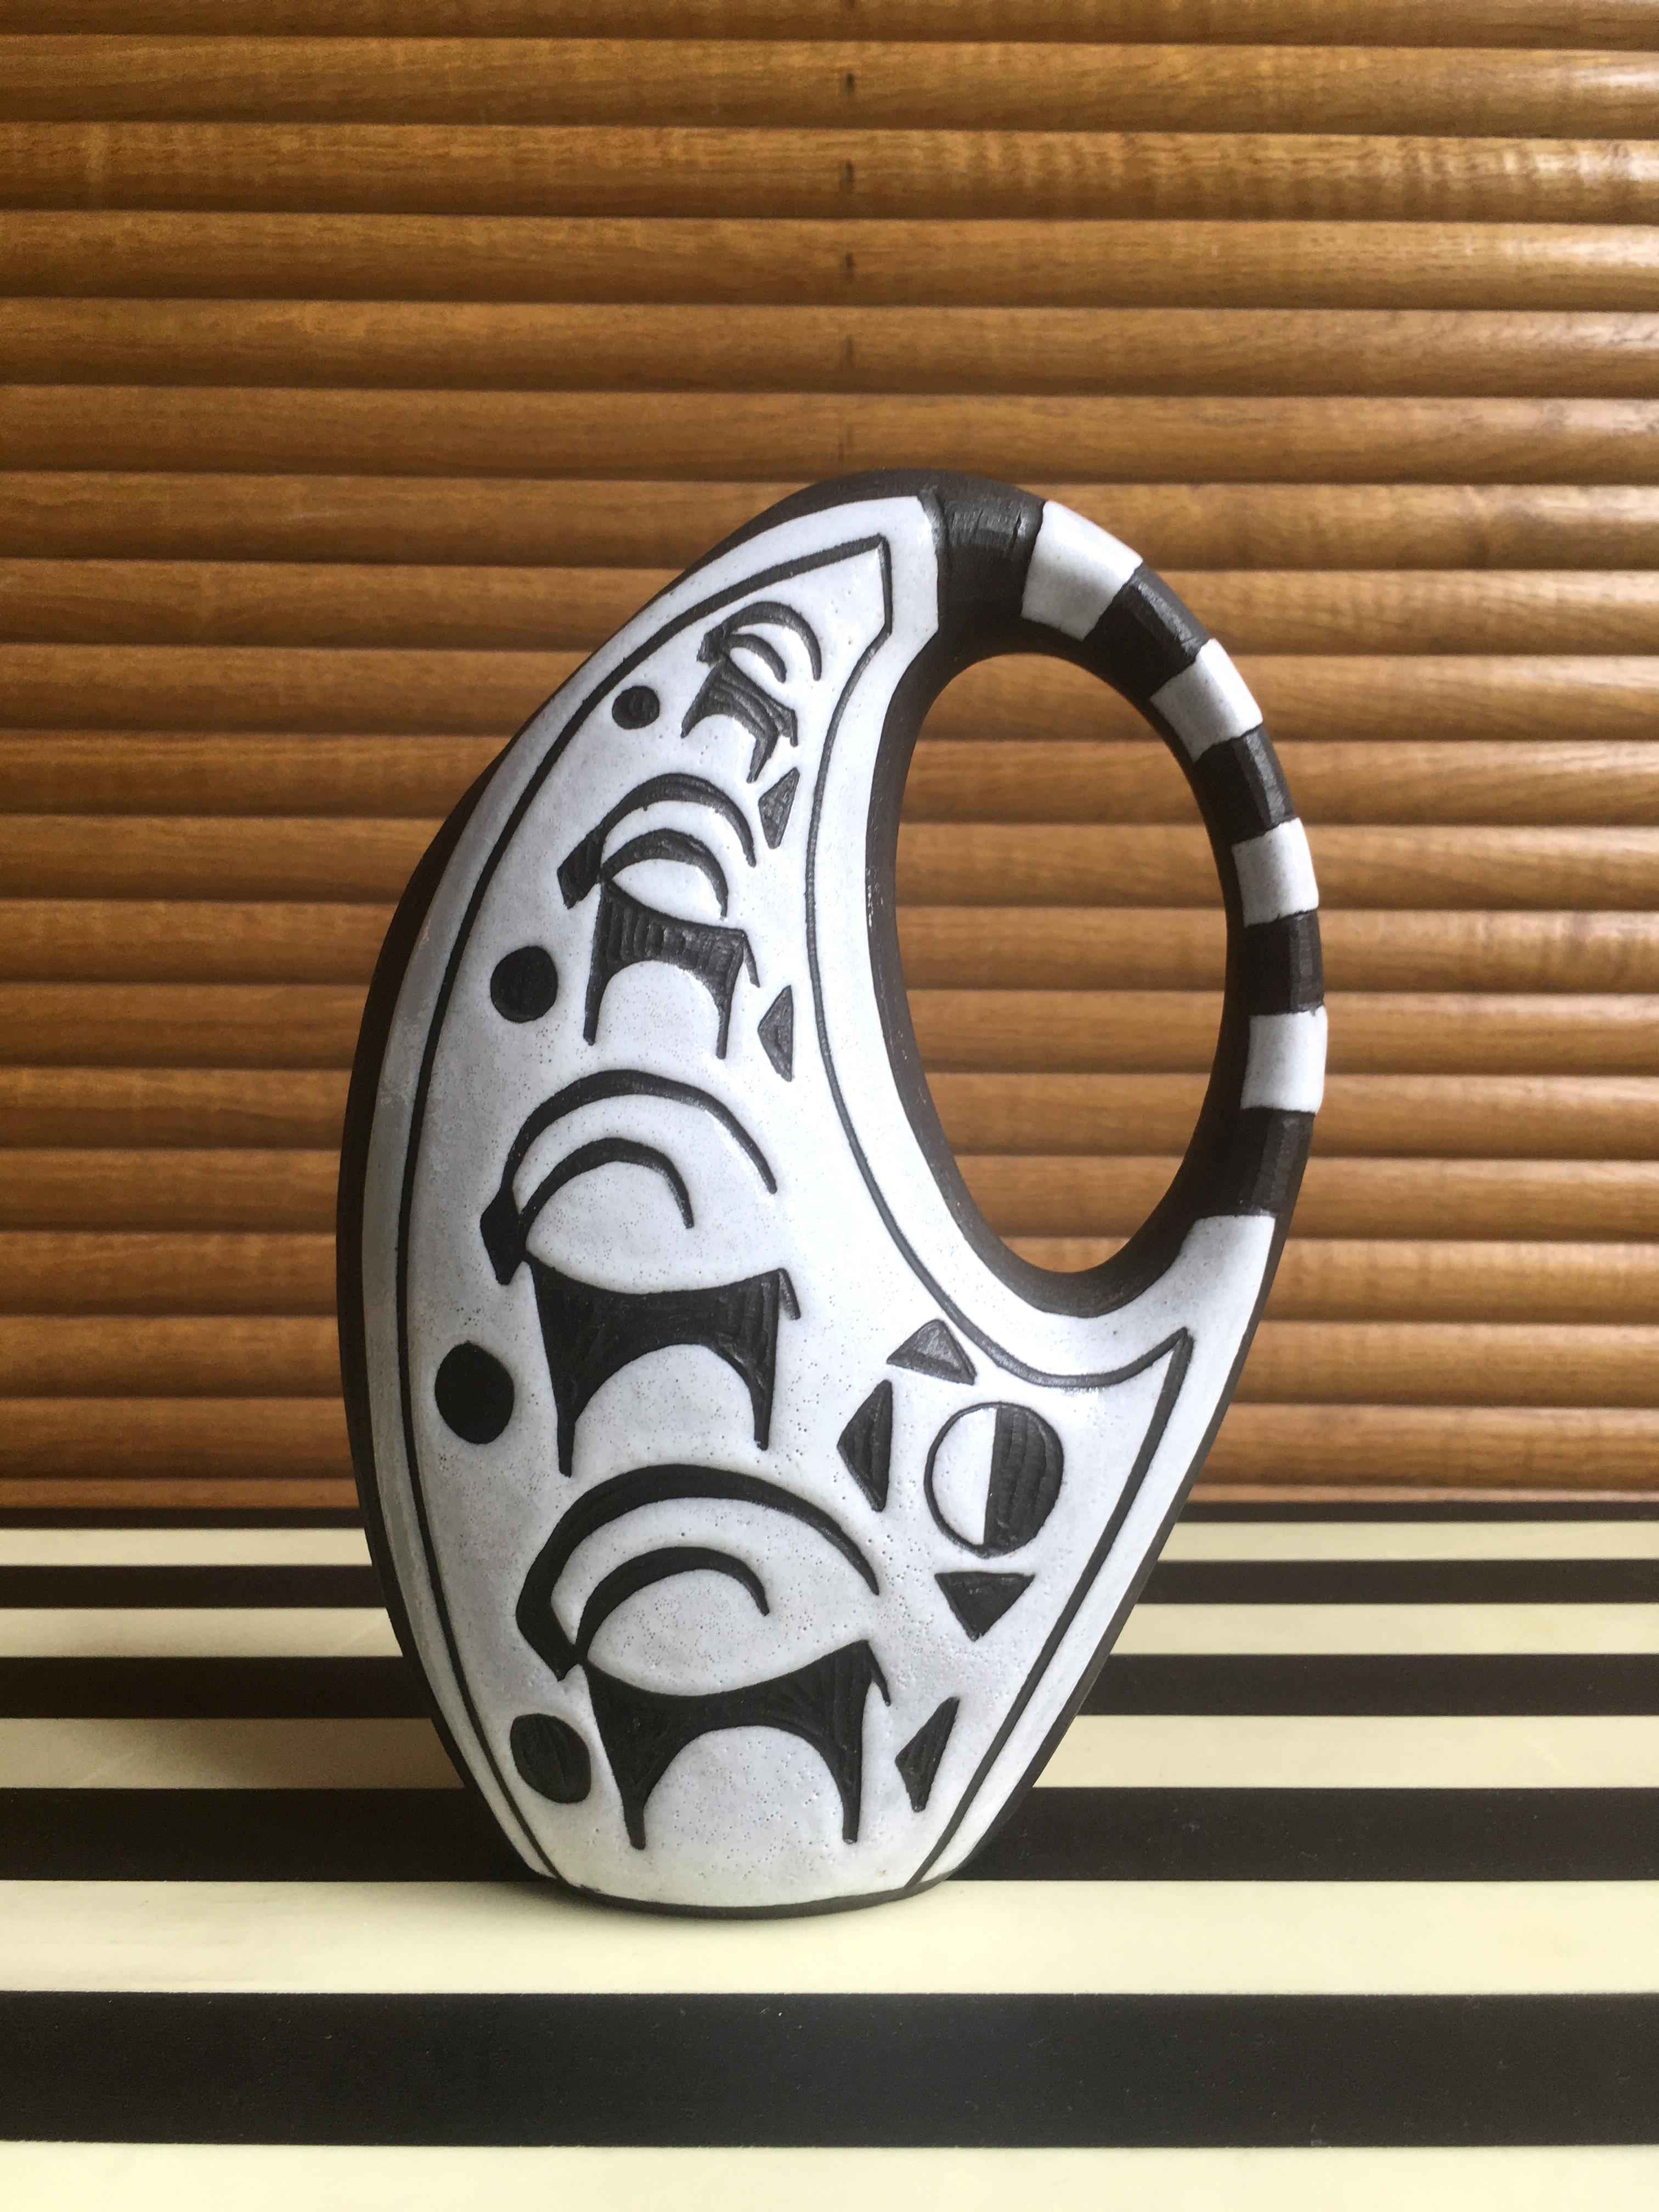 Beautiful handmade Danish modernist ceramic pitcher vase from the Tribal series by ceramic artist Marianne Starck (1931-2007). Smooth rounded shapes with striped handle. White glaze with hand-carved stylized animal decor on raw anthracite clay. Made